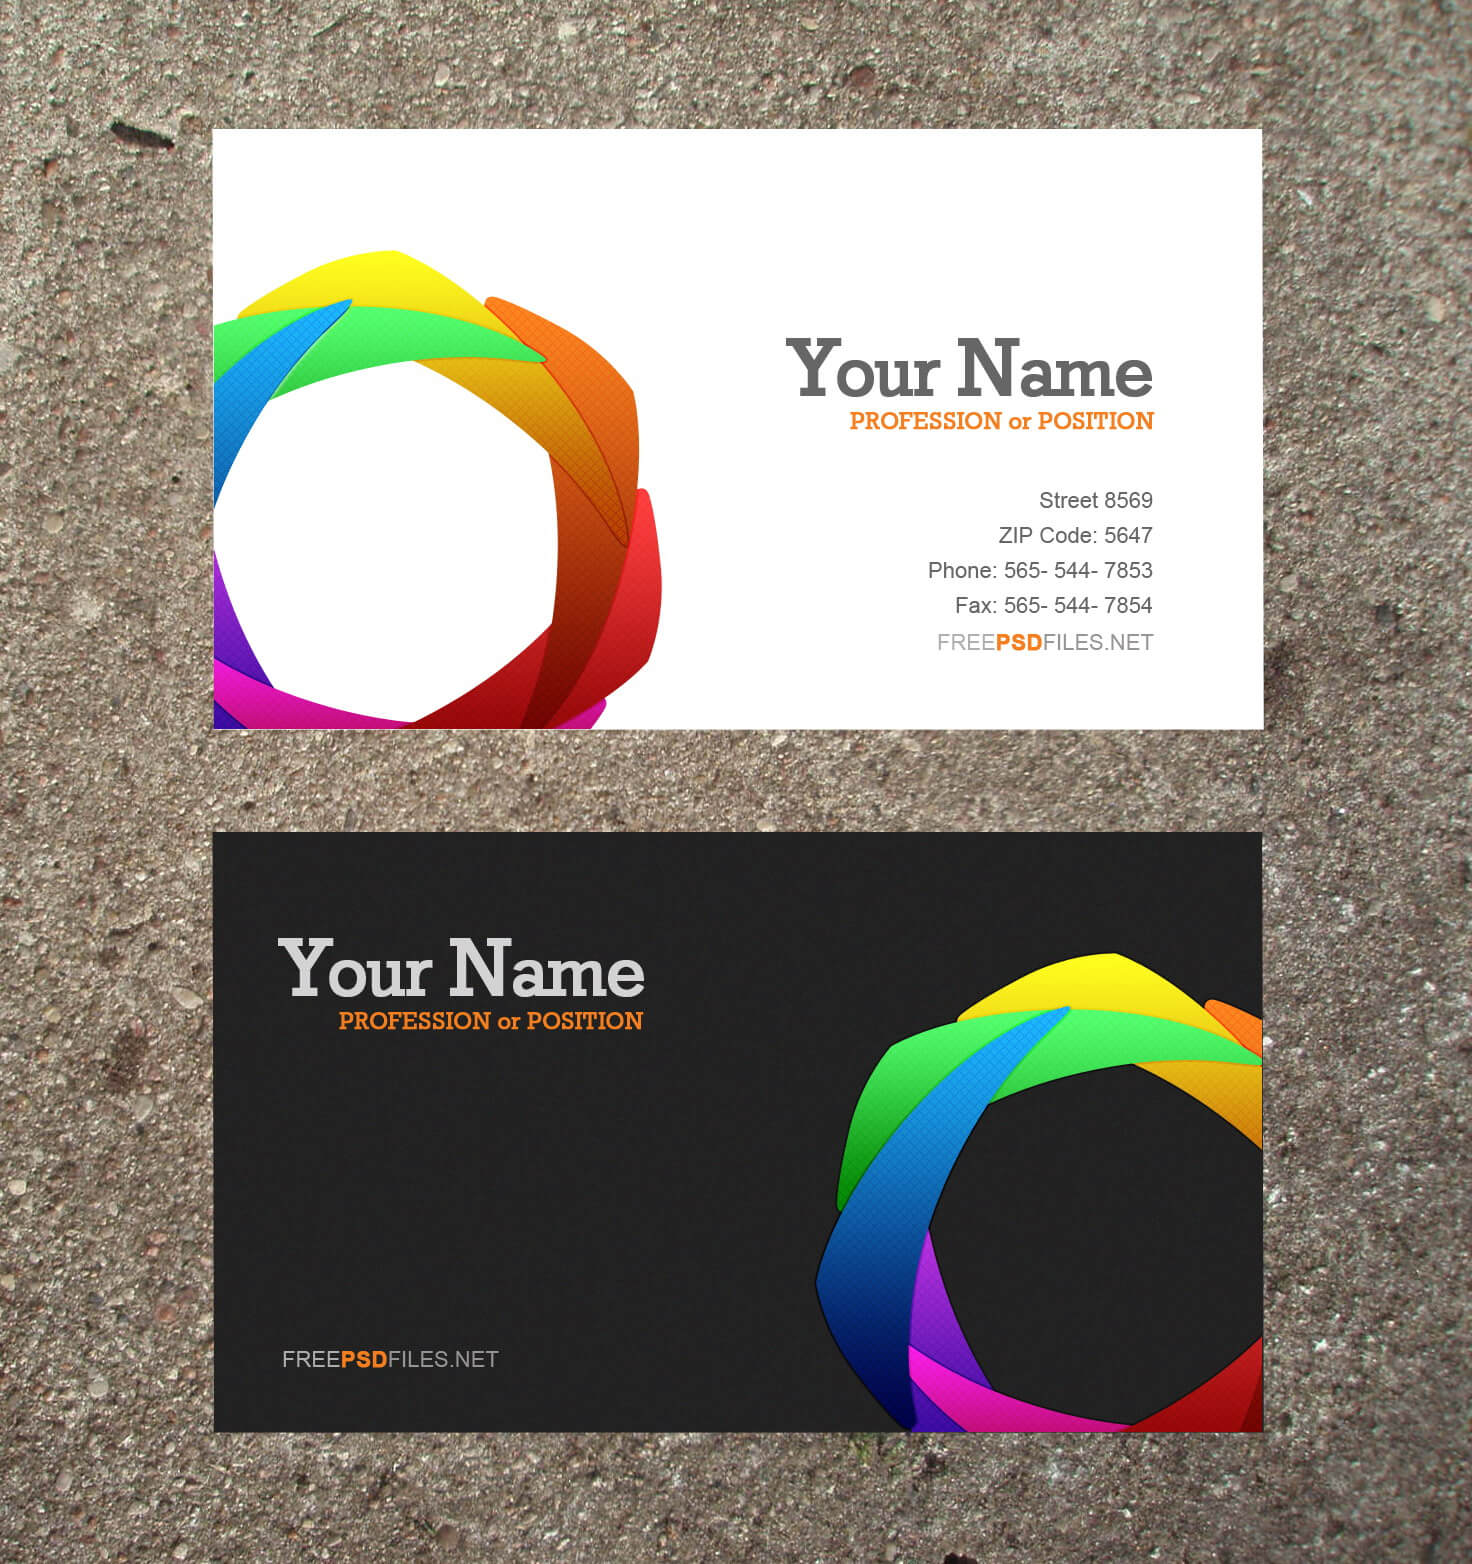 Stunning Cliparts | Clipart Business Card Software Templates With Regard To Blank Business Card Template Download